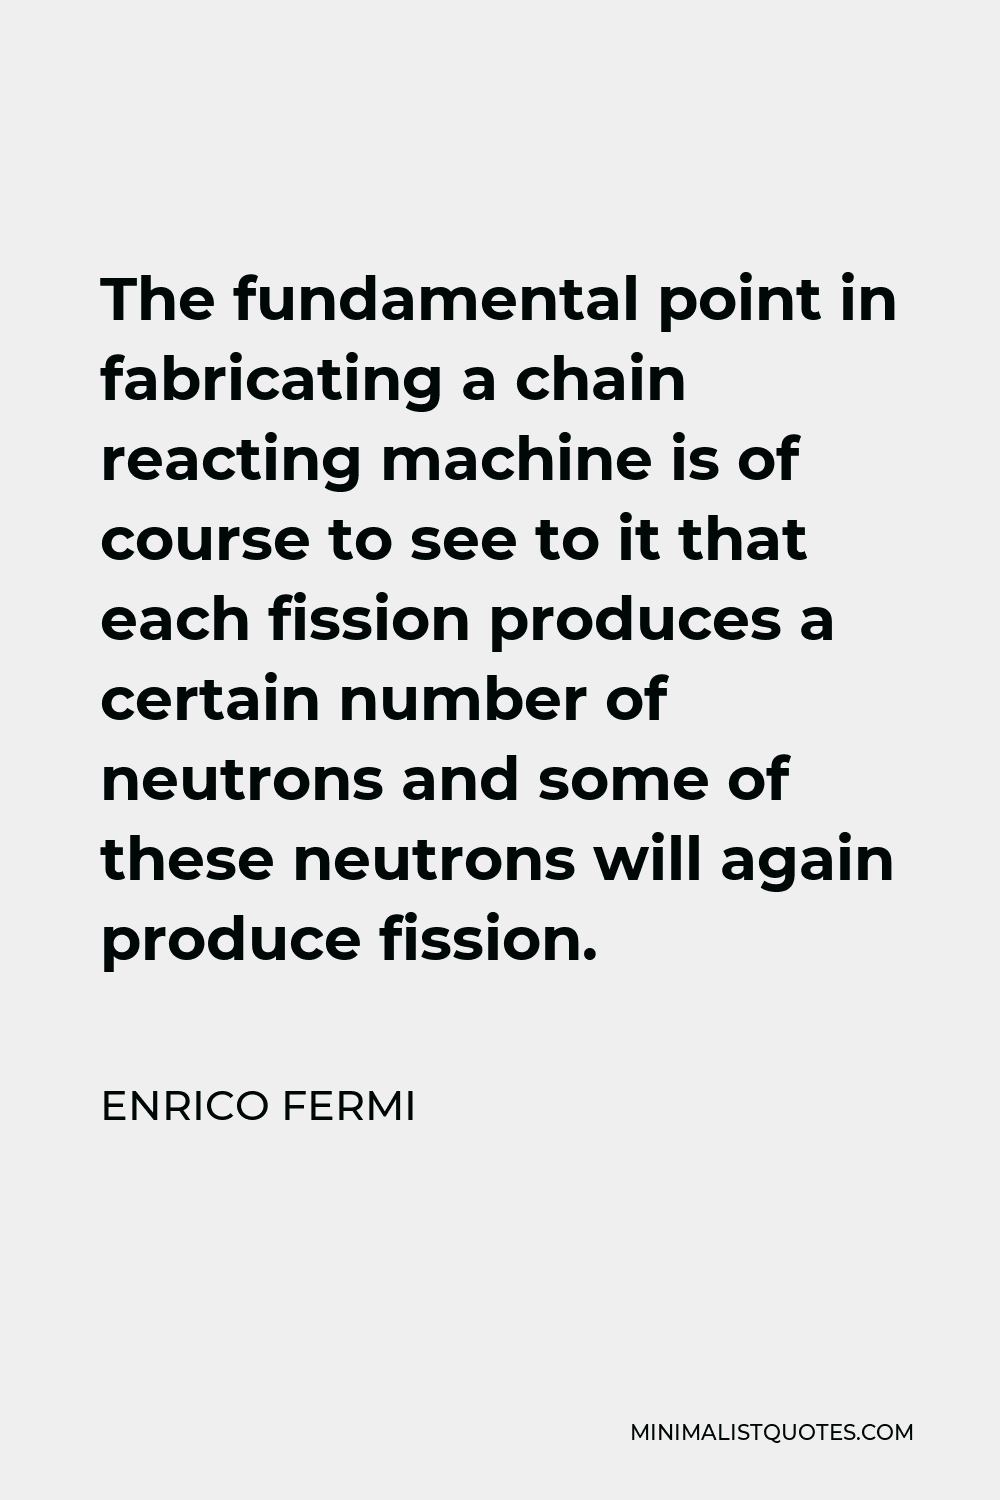 Enrico Fermi Quote - The fundamental point in fabricating a chain reacting machine is of course to see to it that each fission produces a certain number of neutrons and some of these neutrons will again produce fission.